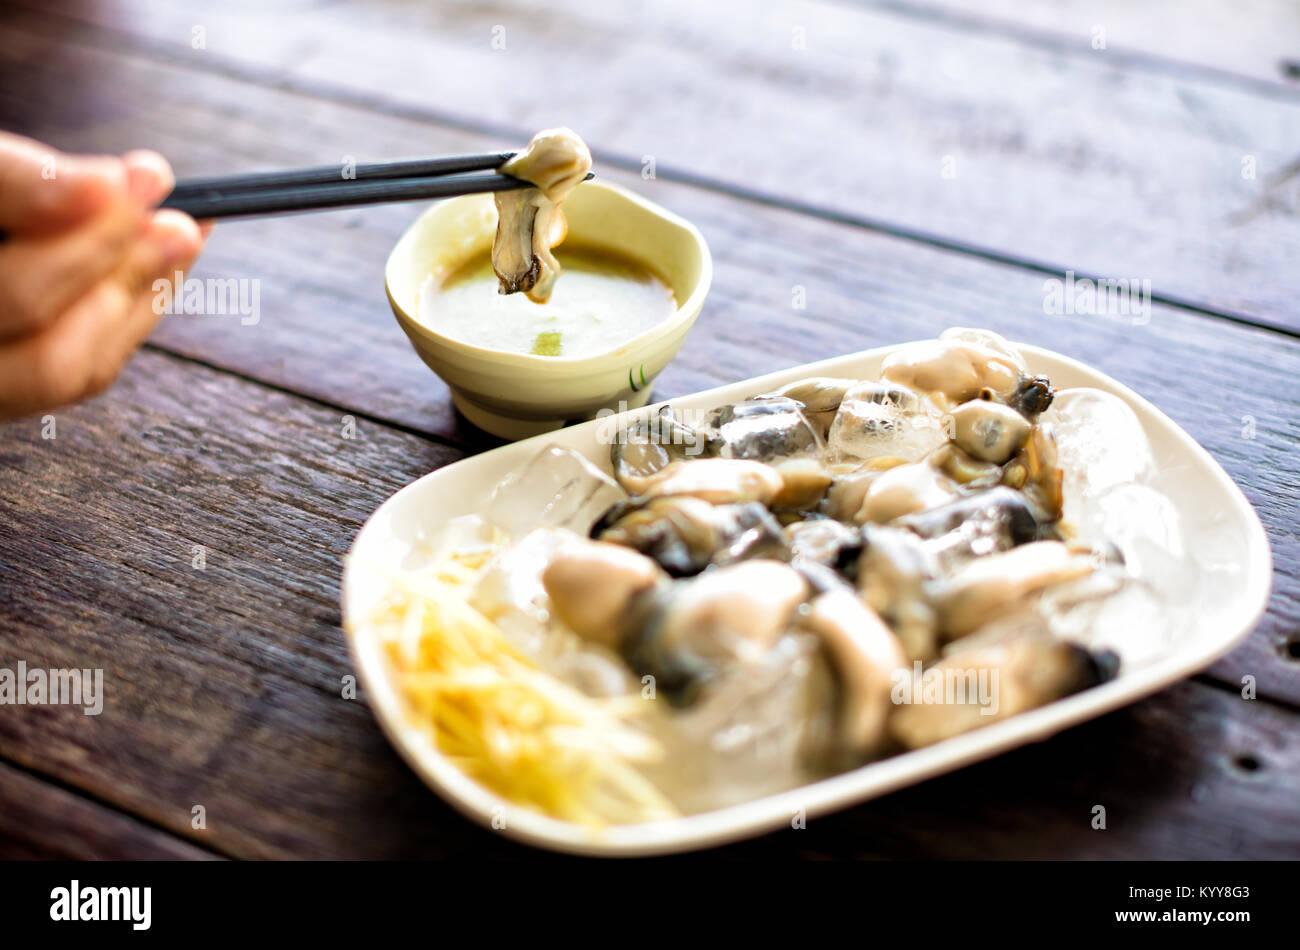 wasabi and fresh Oysters on the table Stock Photo